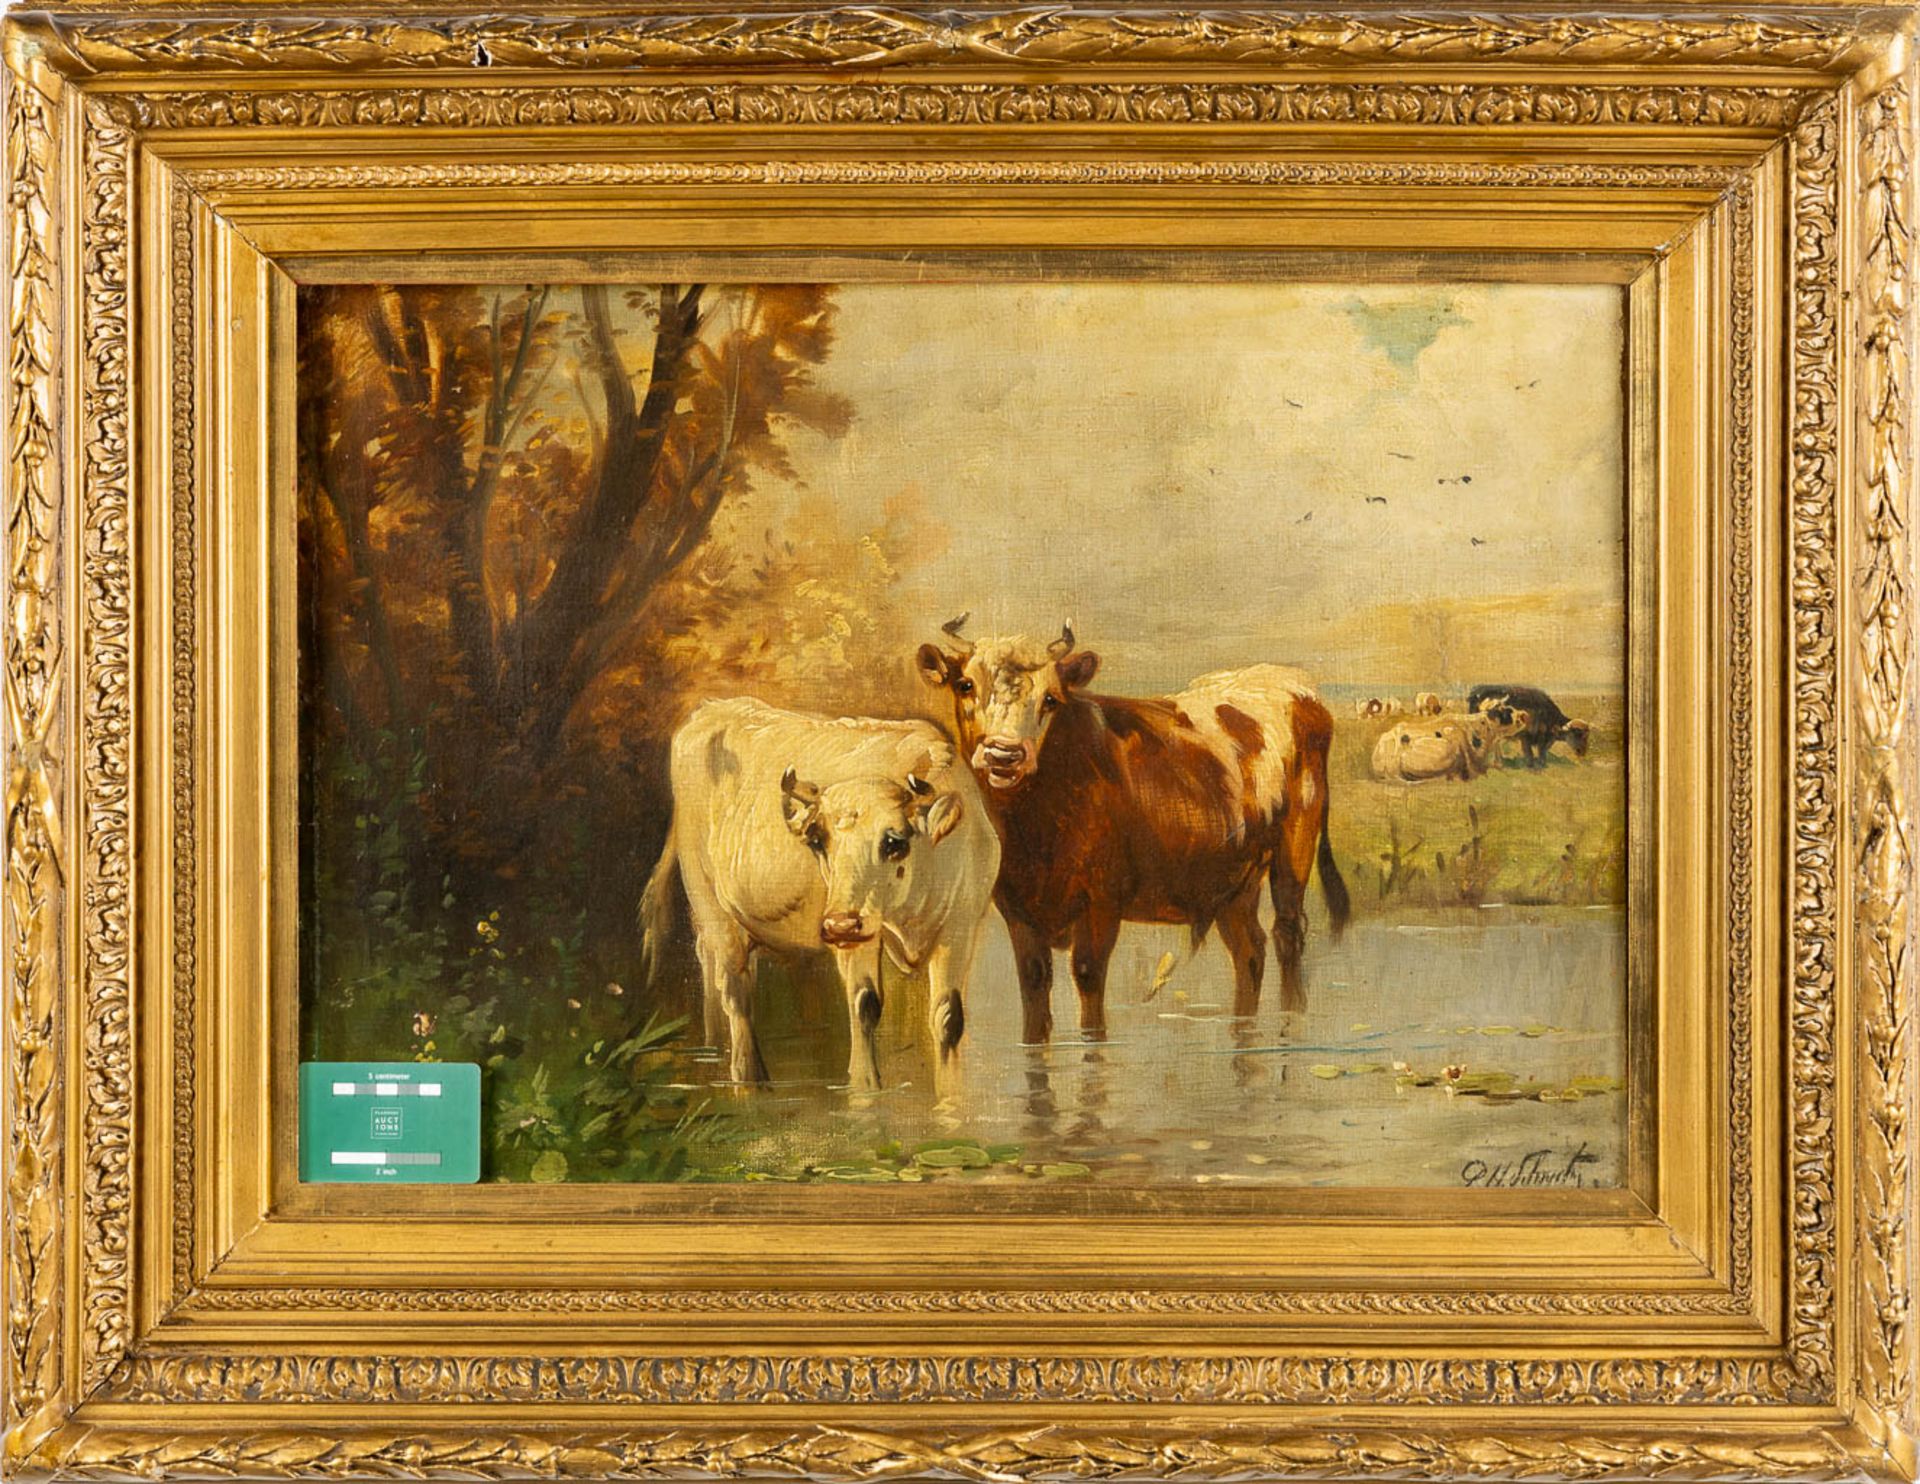 Paul SCHOUTEN (1860-1922) 'Cows in a pond' oil on canvas. (W:62 x H:45 cm) - Image 2 of 10